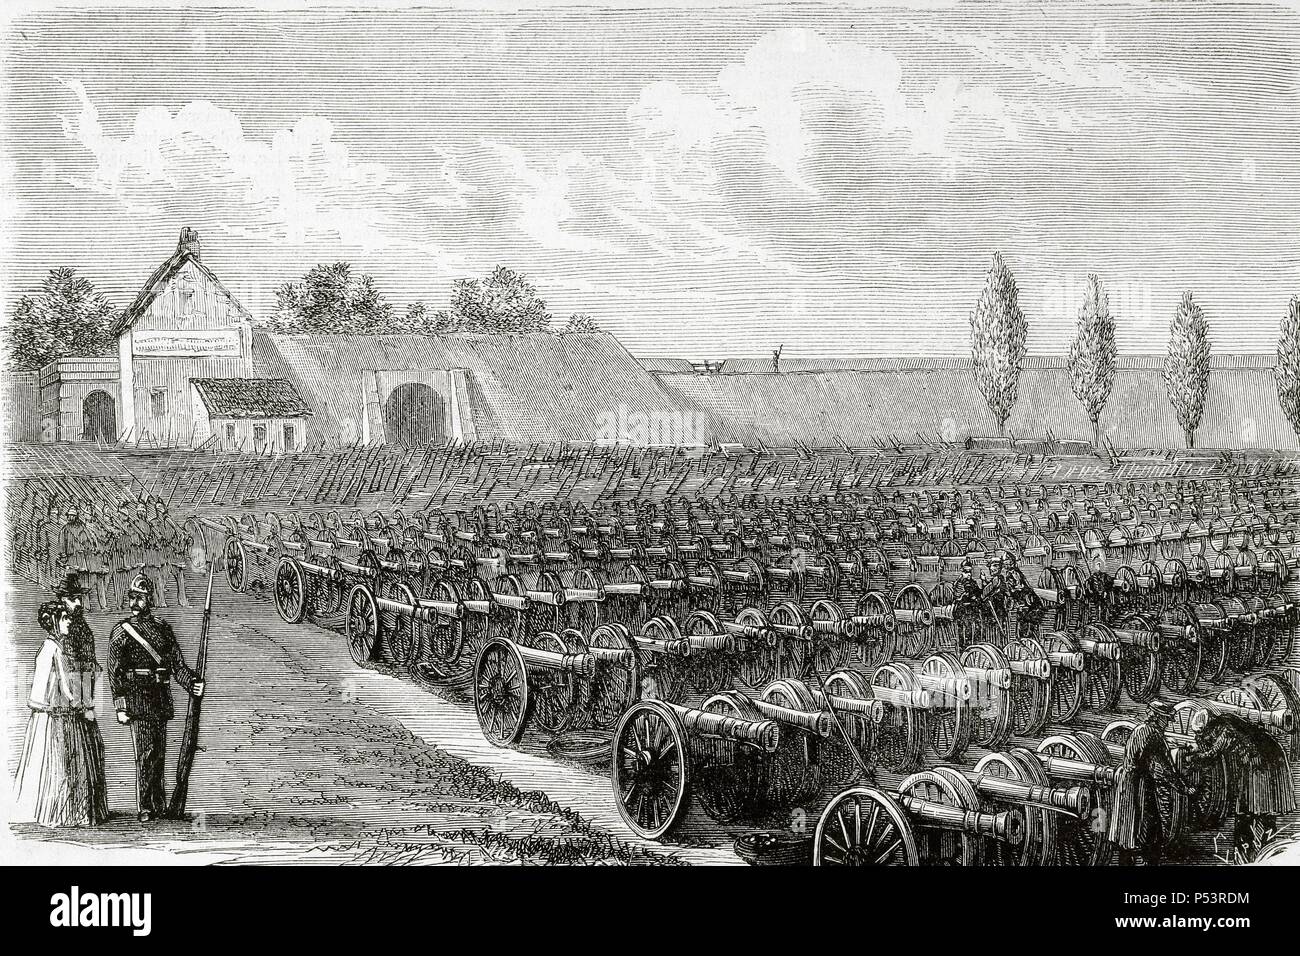 Franco-Prussian War (1870-1871). Cannons taken in Sedan. The Spanish Illustration, 1871. Engraving by Capuz. Stock Photo